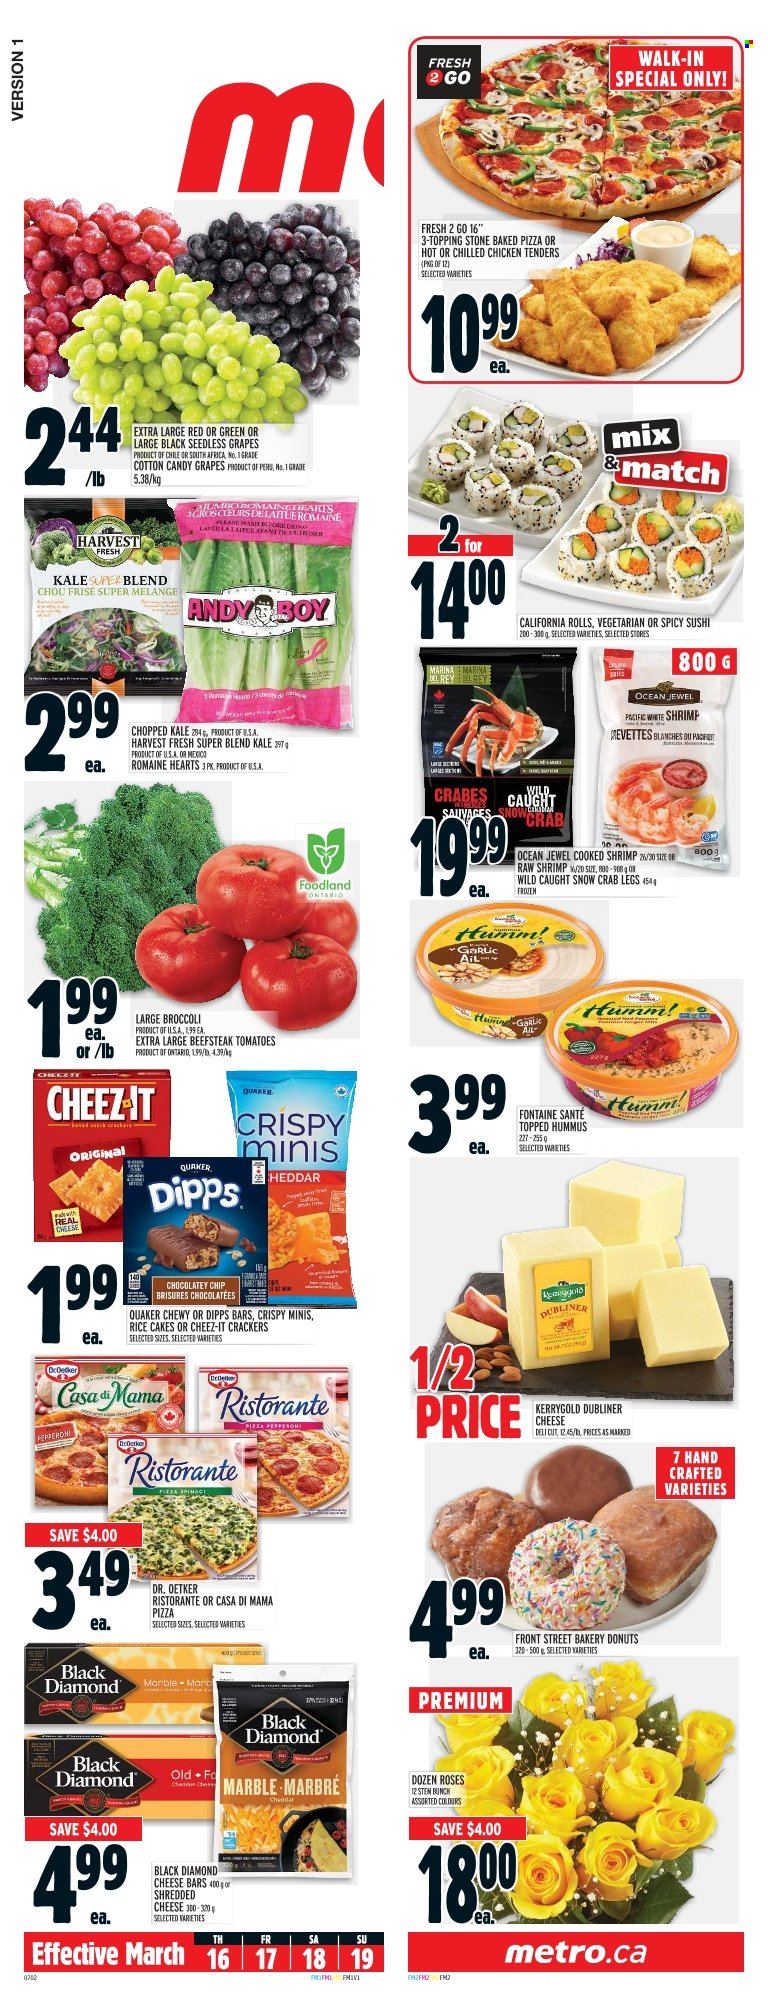 thumbnail - Metro Flyer - March 16, 2023 - March 22, 2023 - Sales products - donut, broccoli, garlic, kale, grapes, seedless grapes, crab legs, crab, shrimps, pizza, chicken tenders, Quaker, pepperoni, hummus, shredded cheese, Dr. Oetker, cotton candy, crackers, Cheez-It, topping, rose. Page 15.